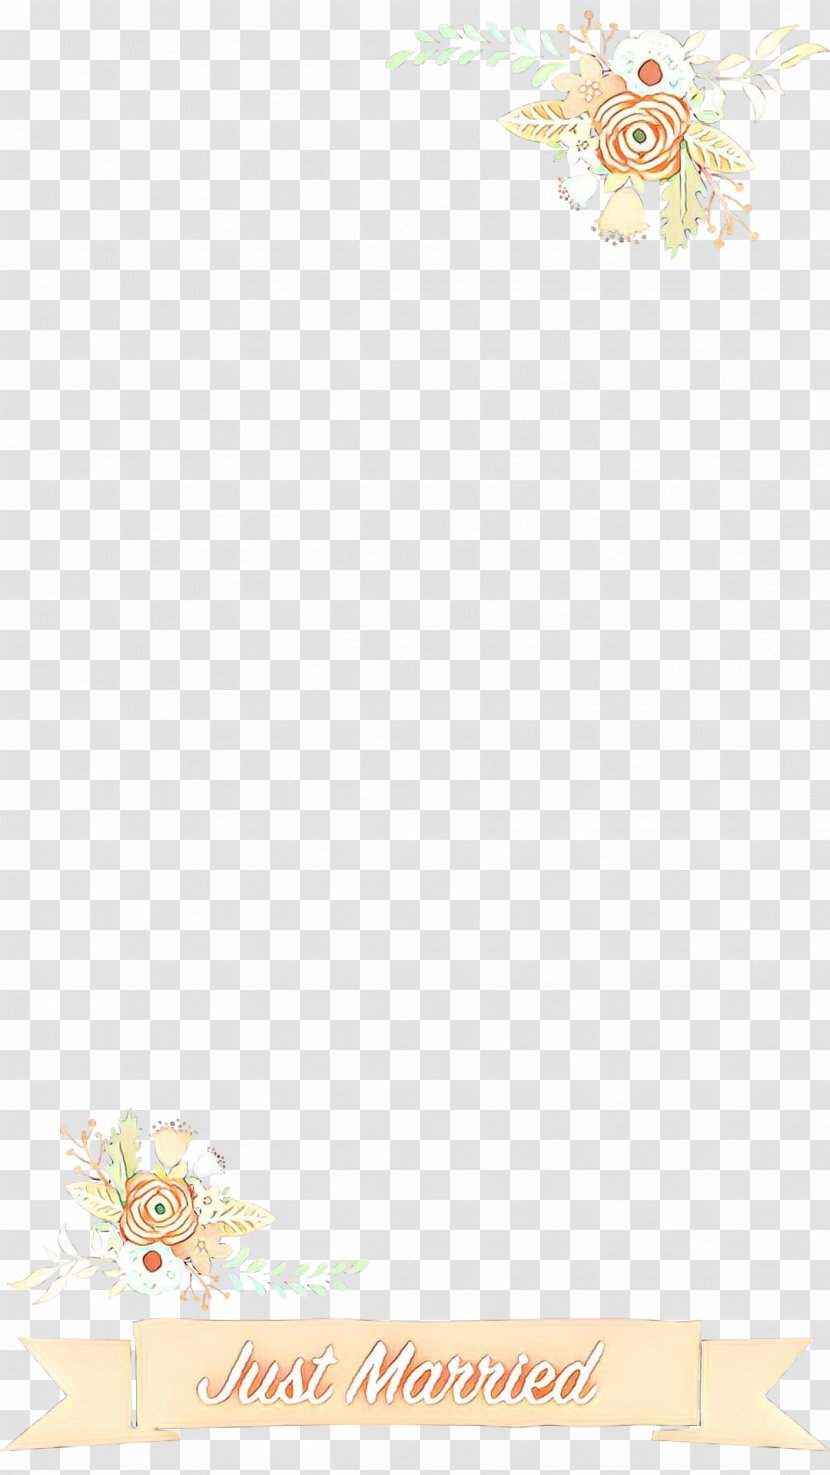 Paper Background - Price - Product Text Transparent PNG